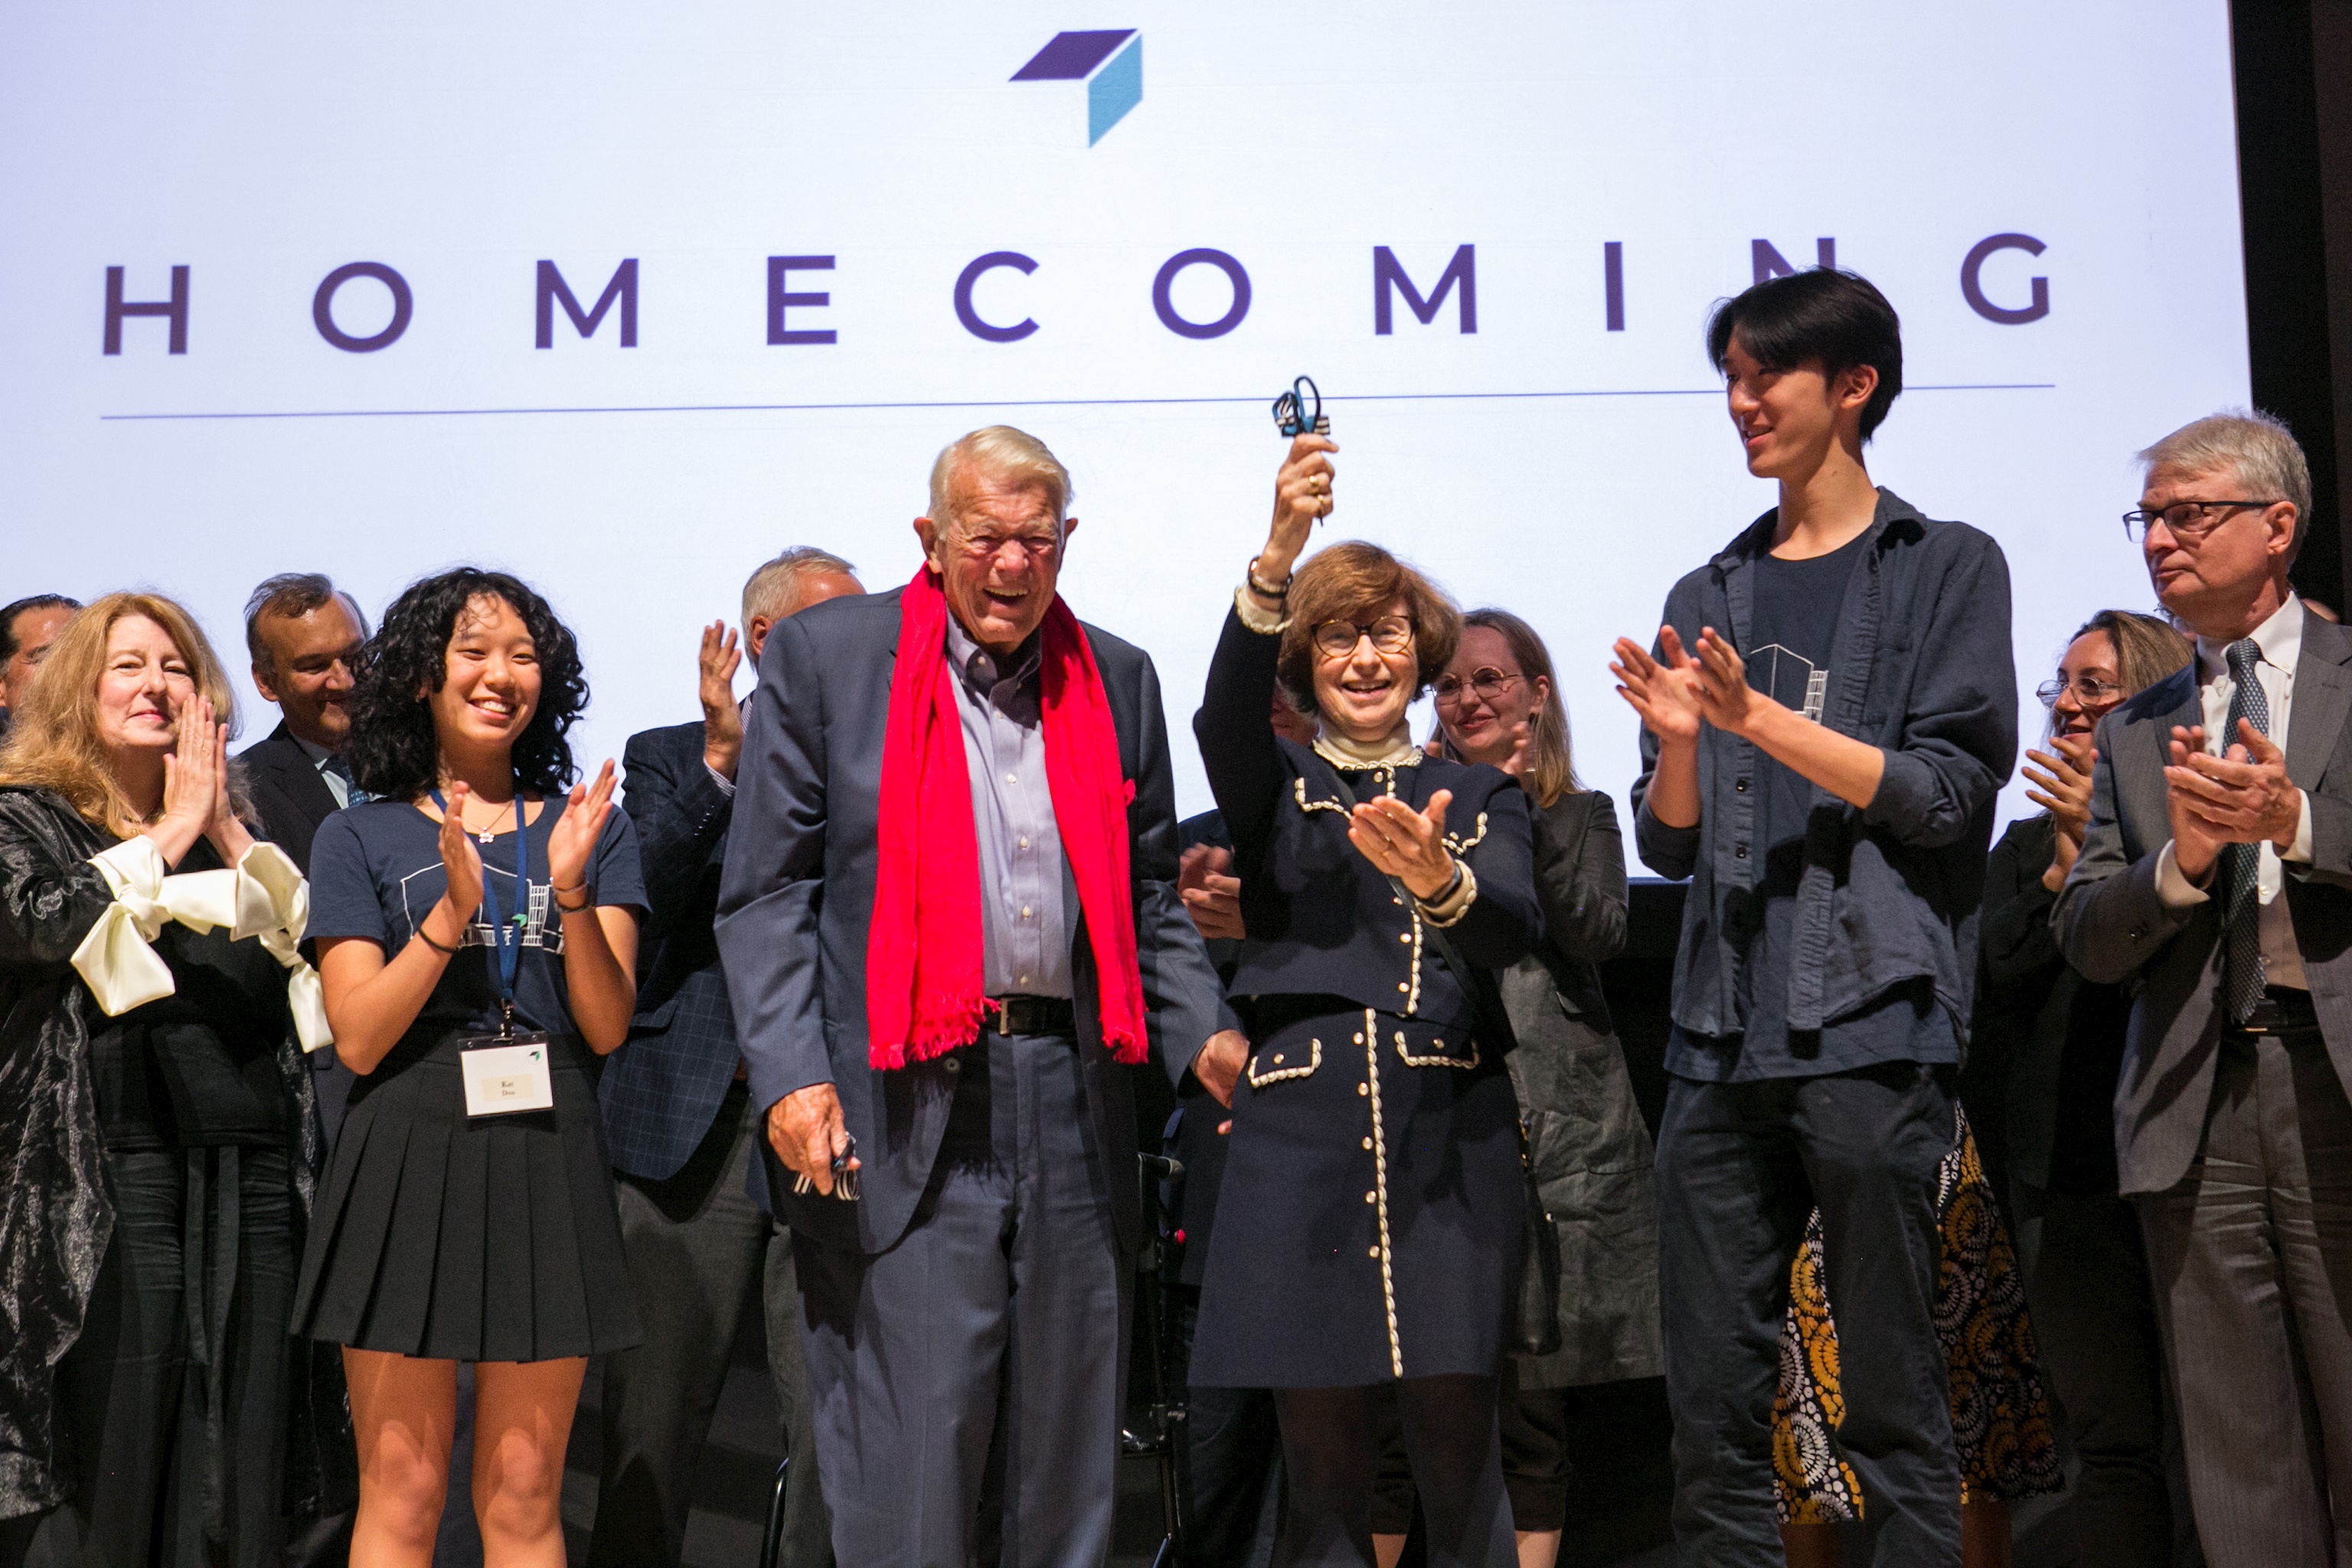 UTS Homecoming celebrates new school building with over 1,000 guests